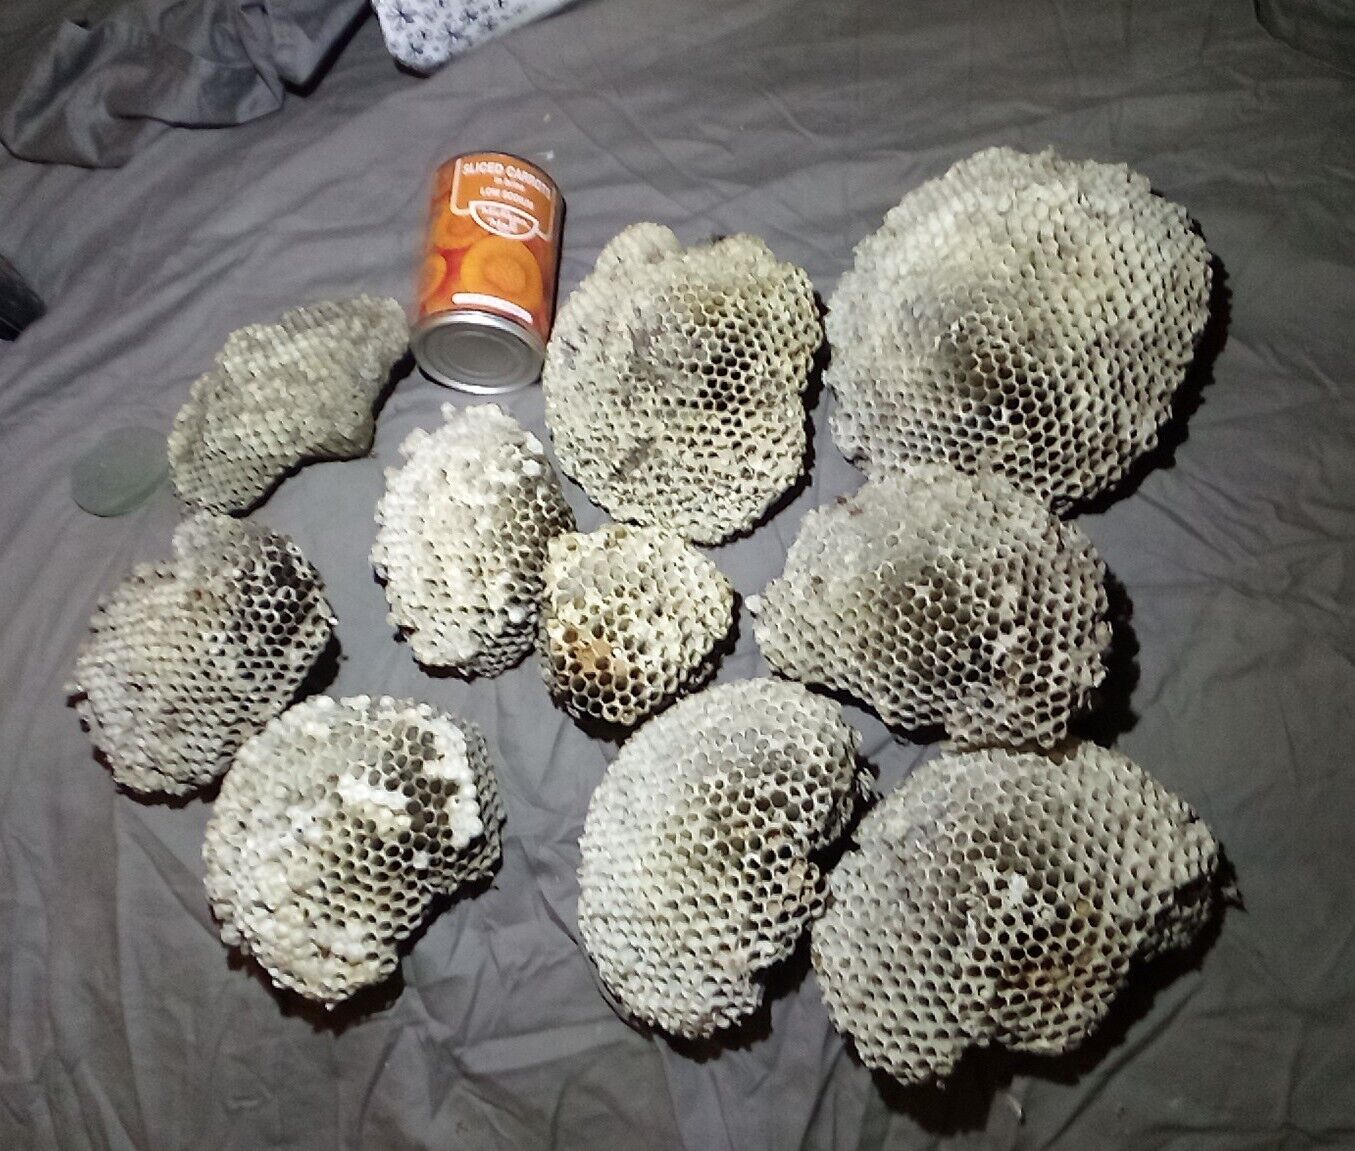 wasp nest From The Foothills Of The Ozarks Added Two More 